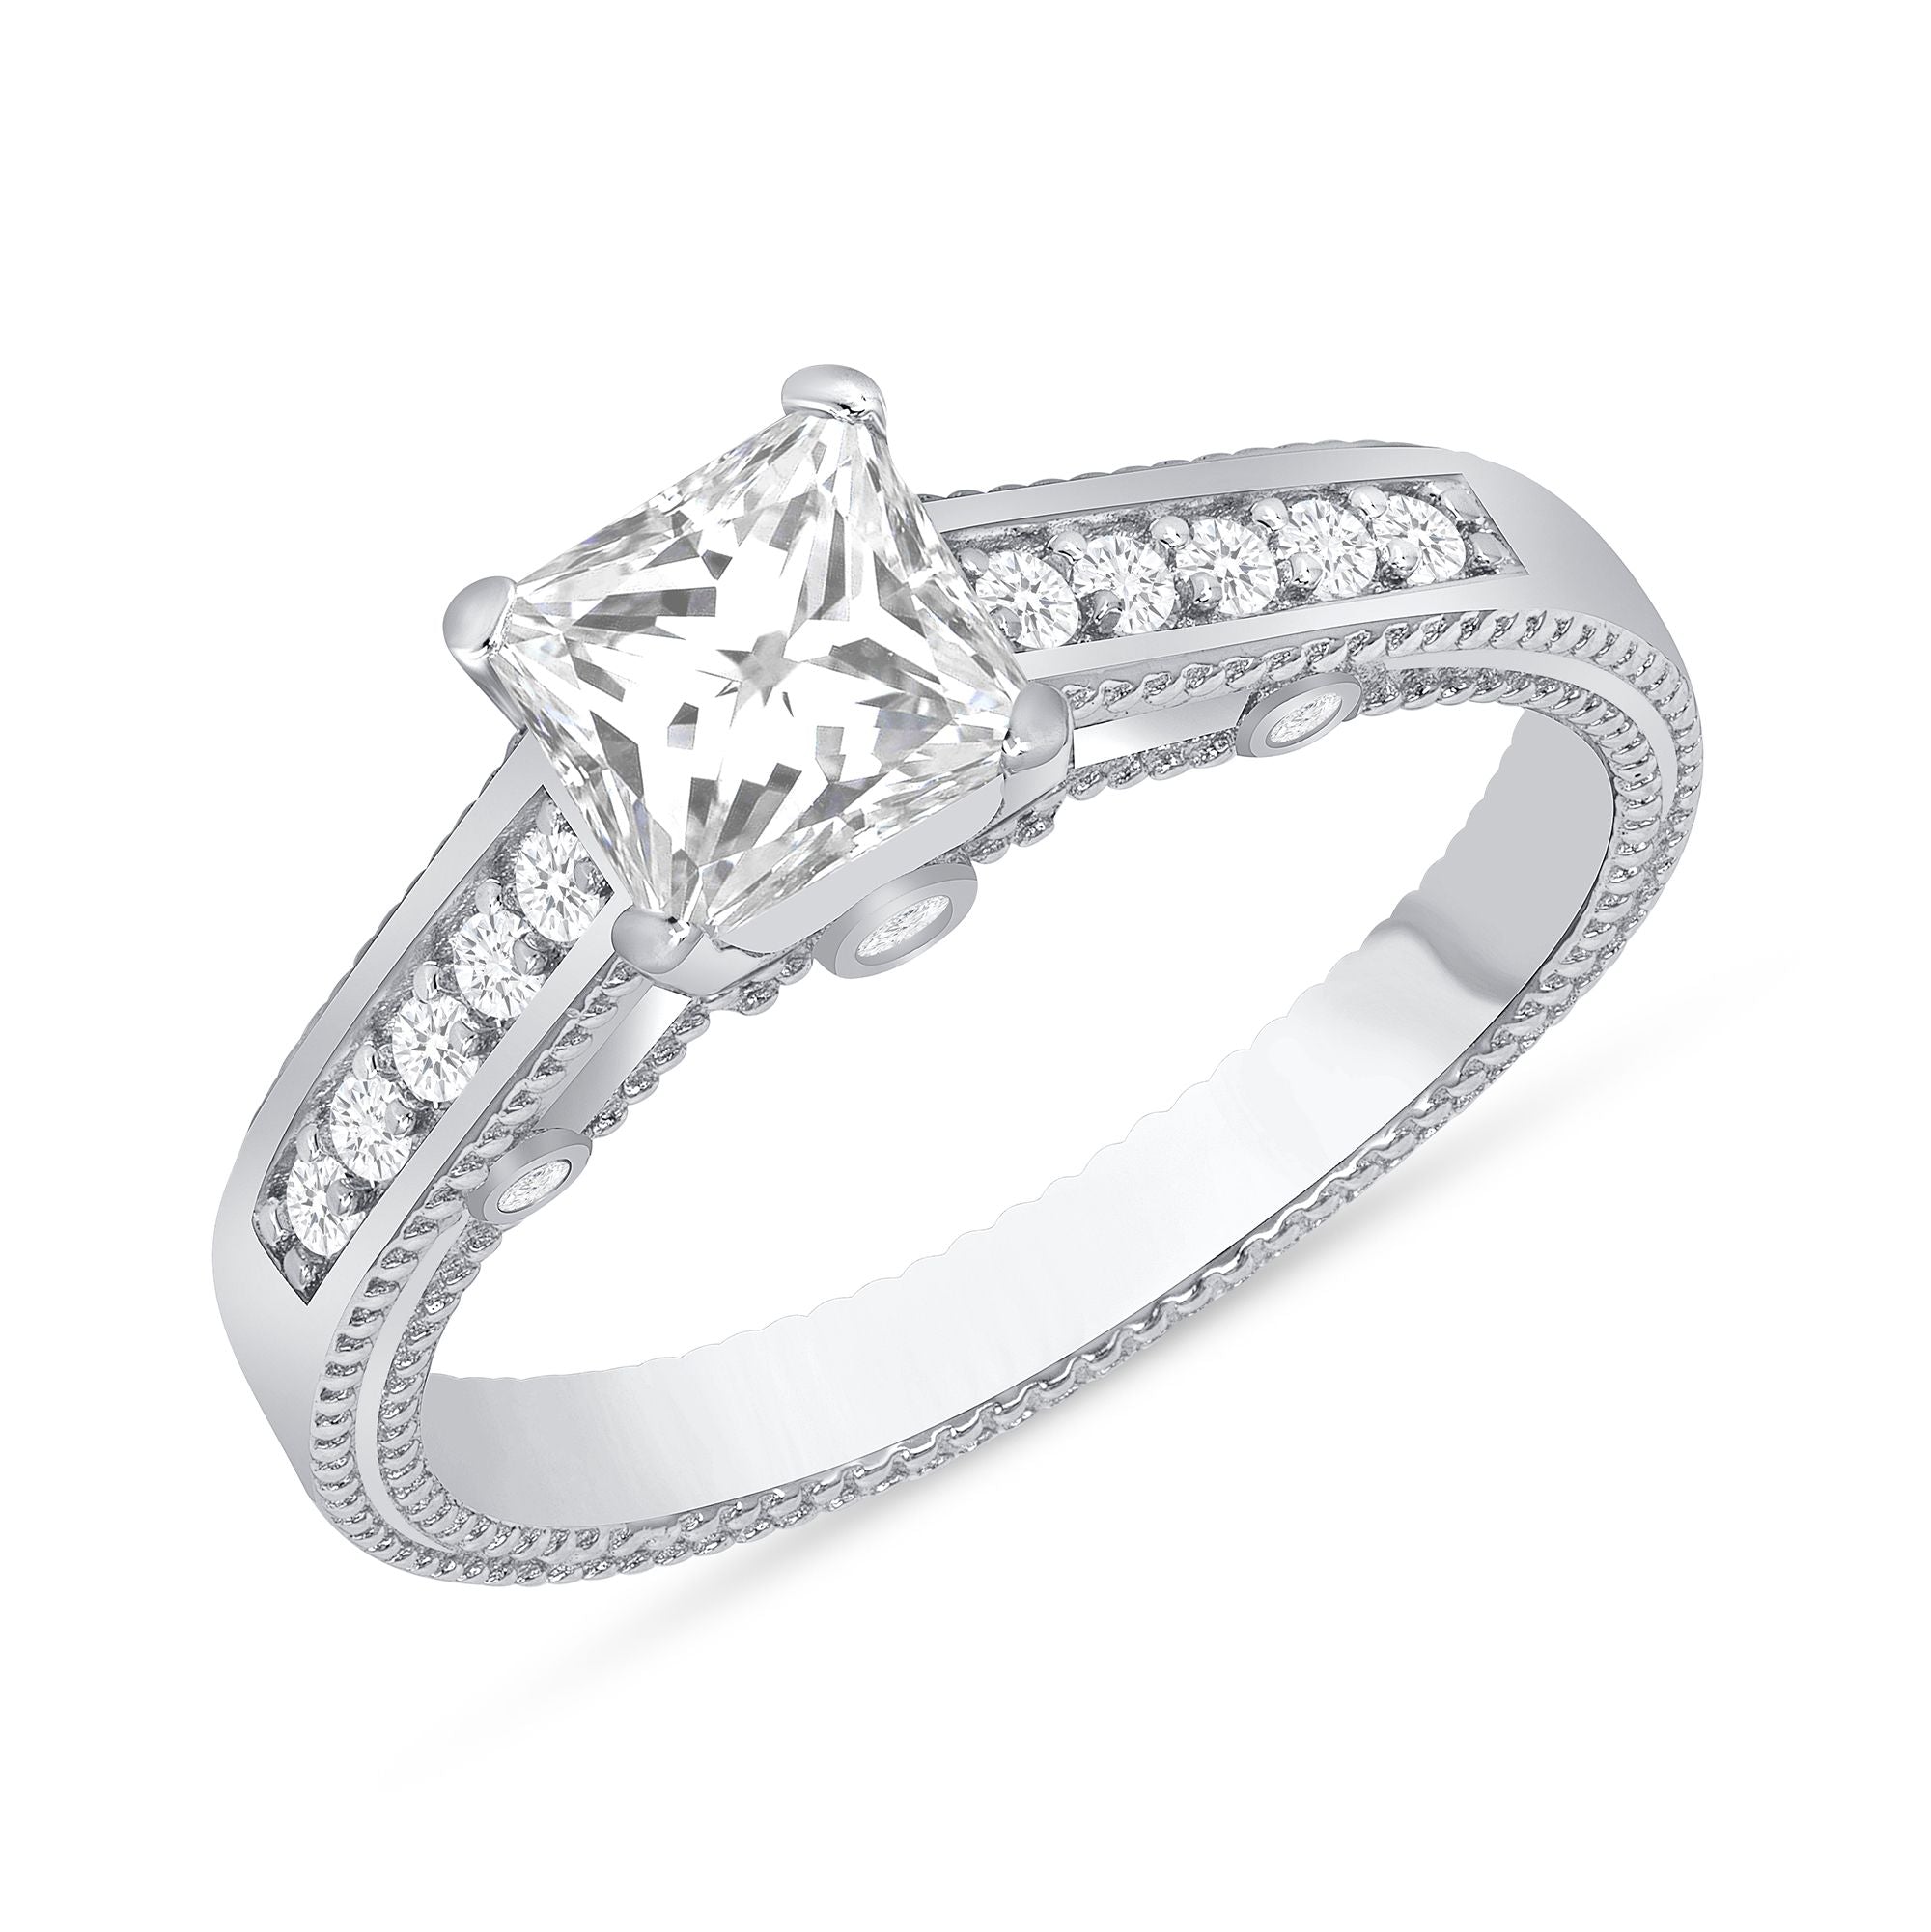 925 Sterling Silver Princess CZ with Channel Bead Band Setting &amp; Profile Milgrain Bezel Set Details Engagement Ring